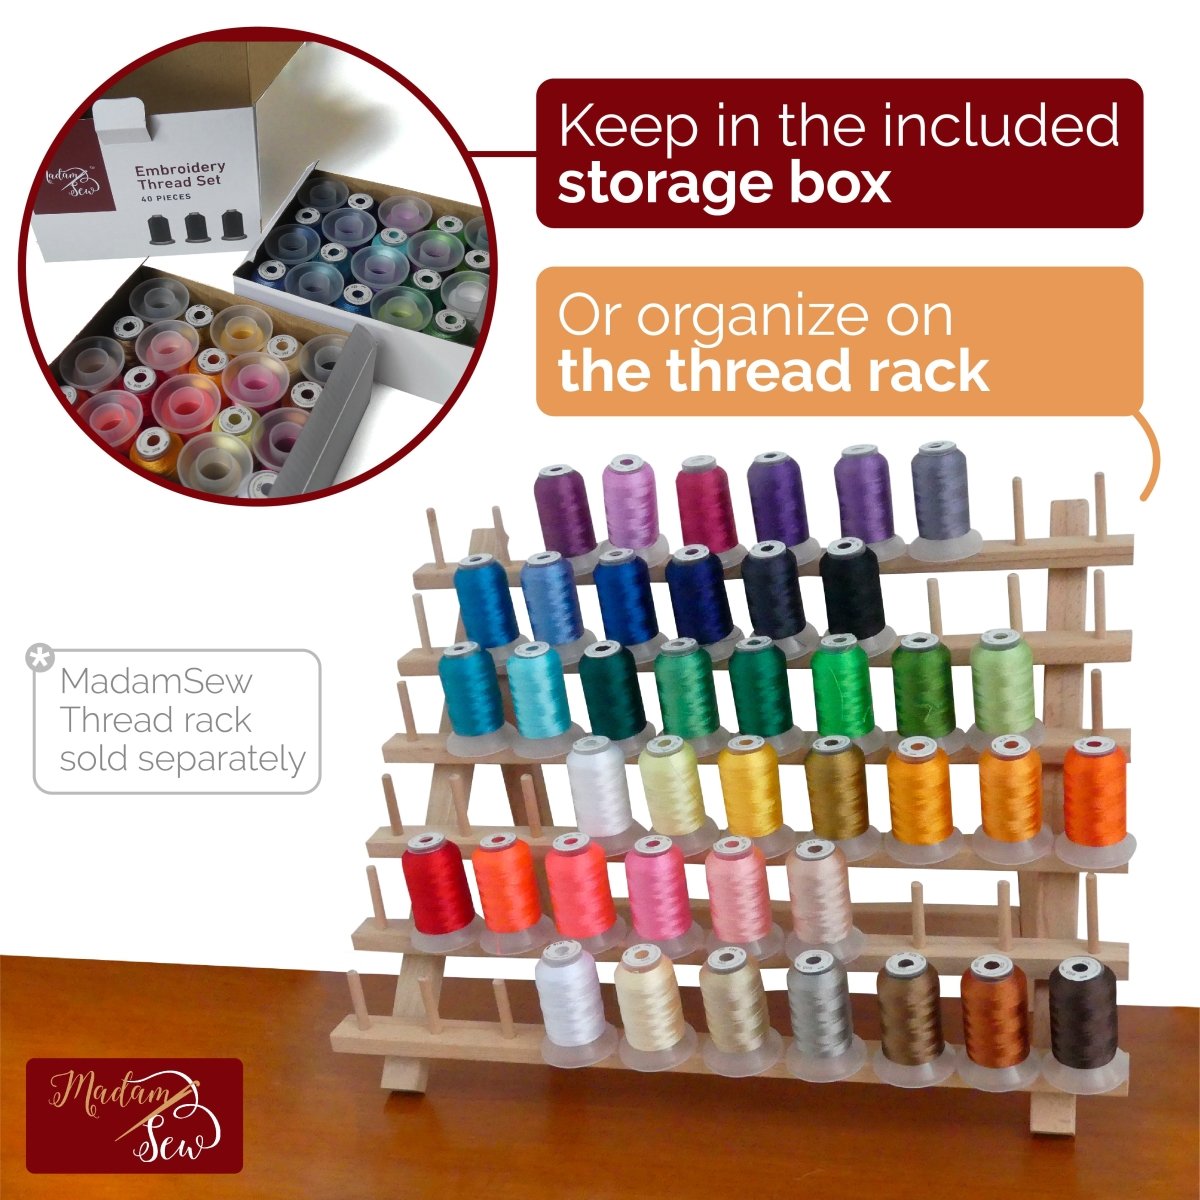 40 spools of Machine Embroidery Thread in different colors on a thread rack